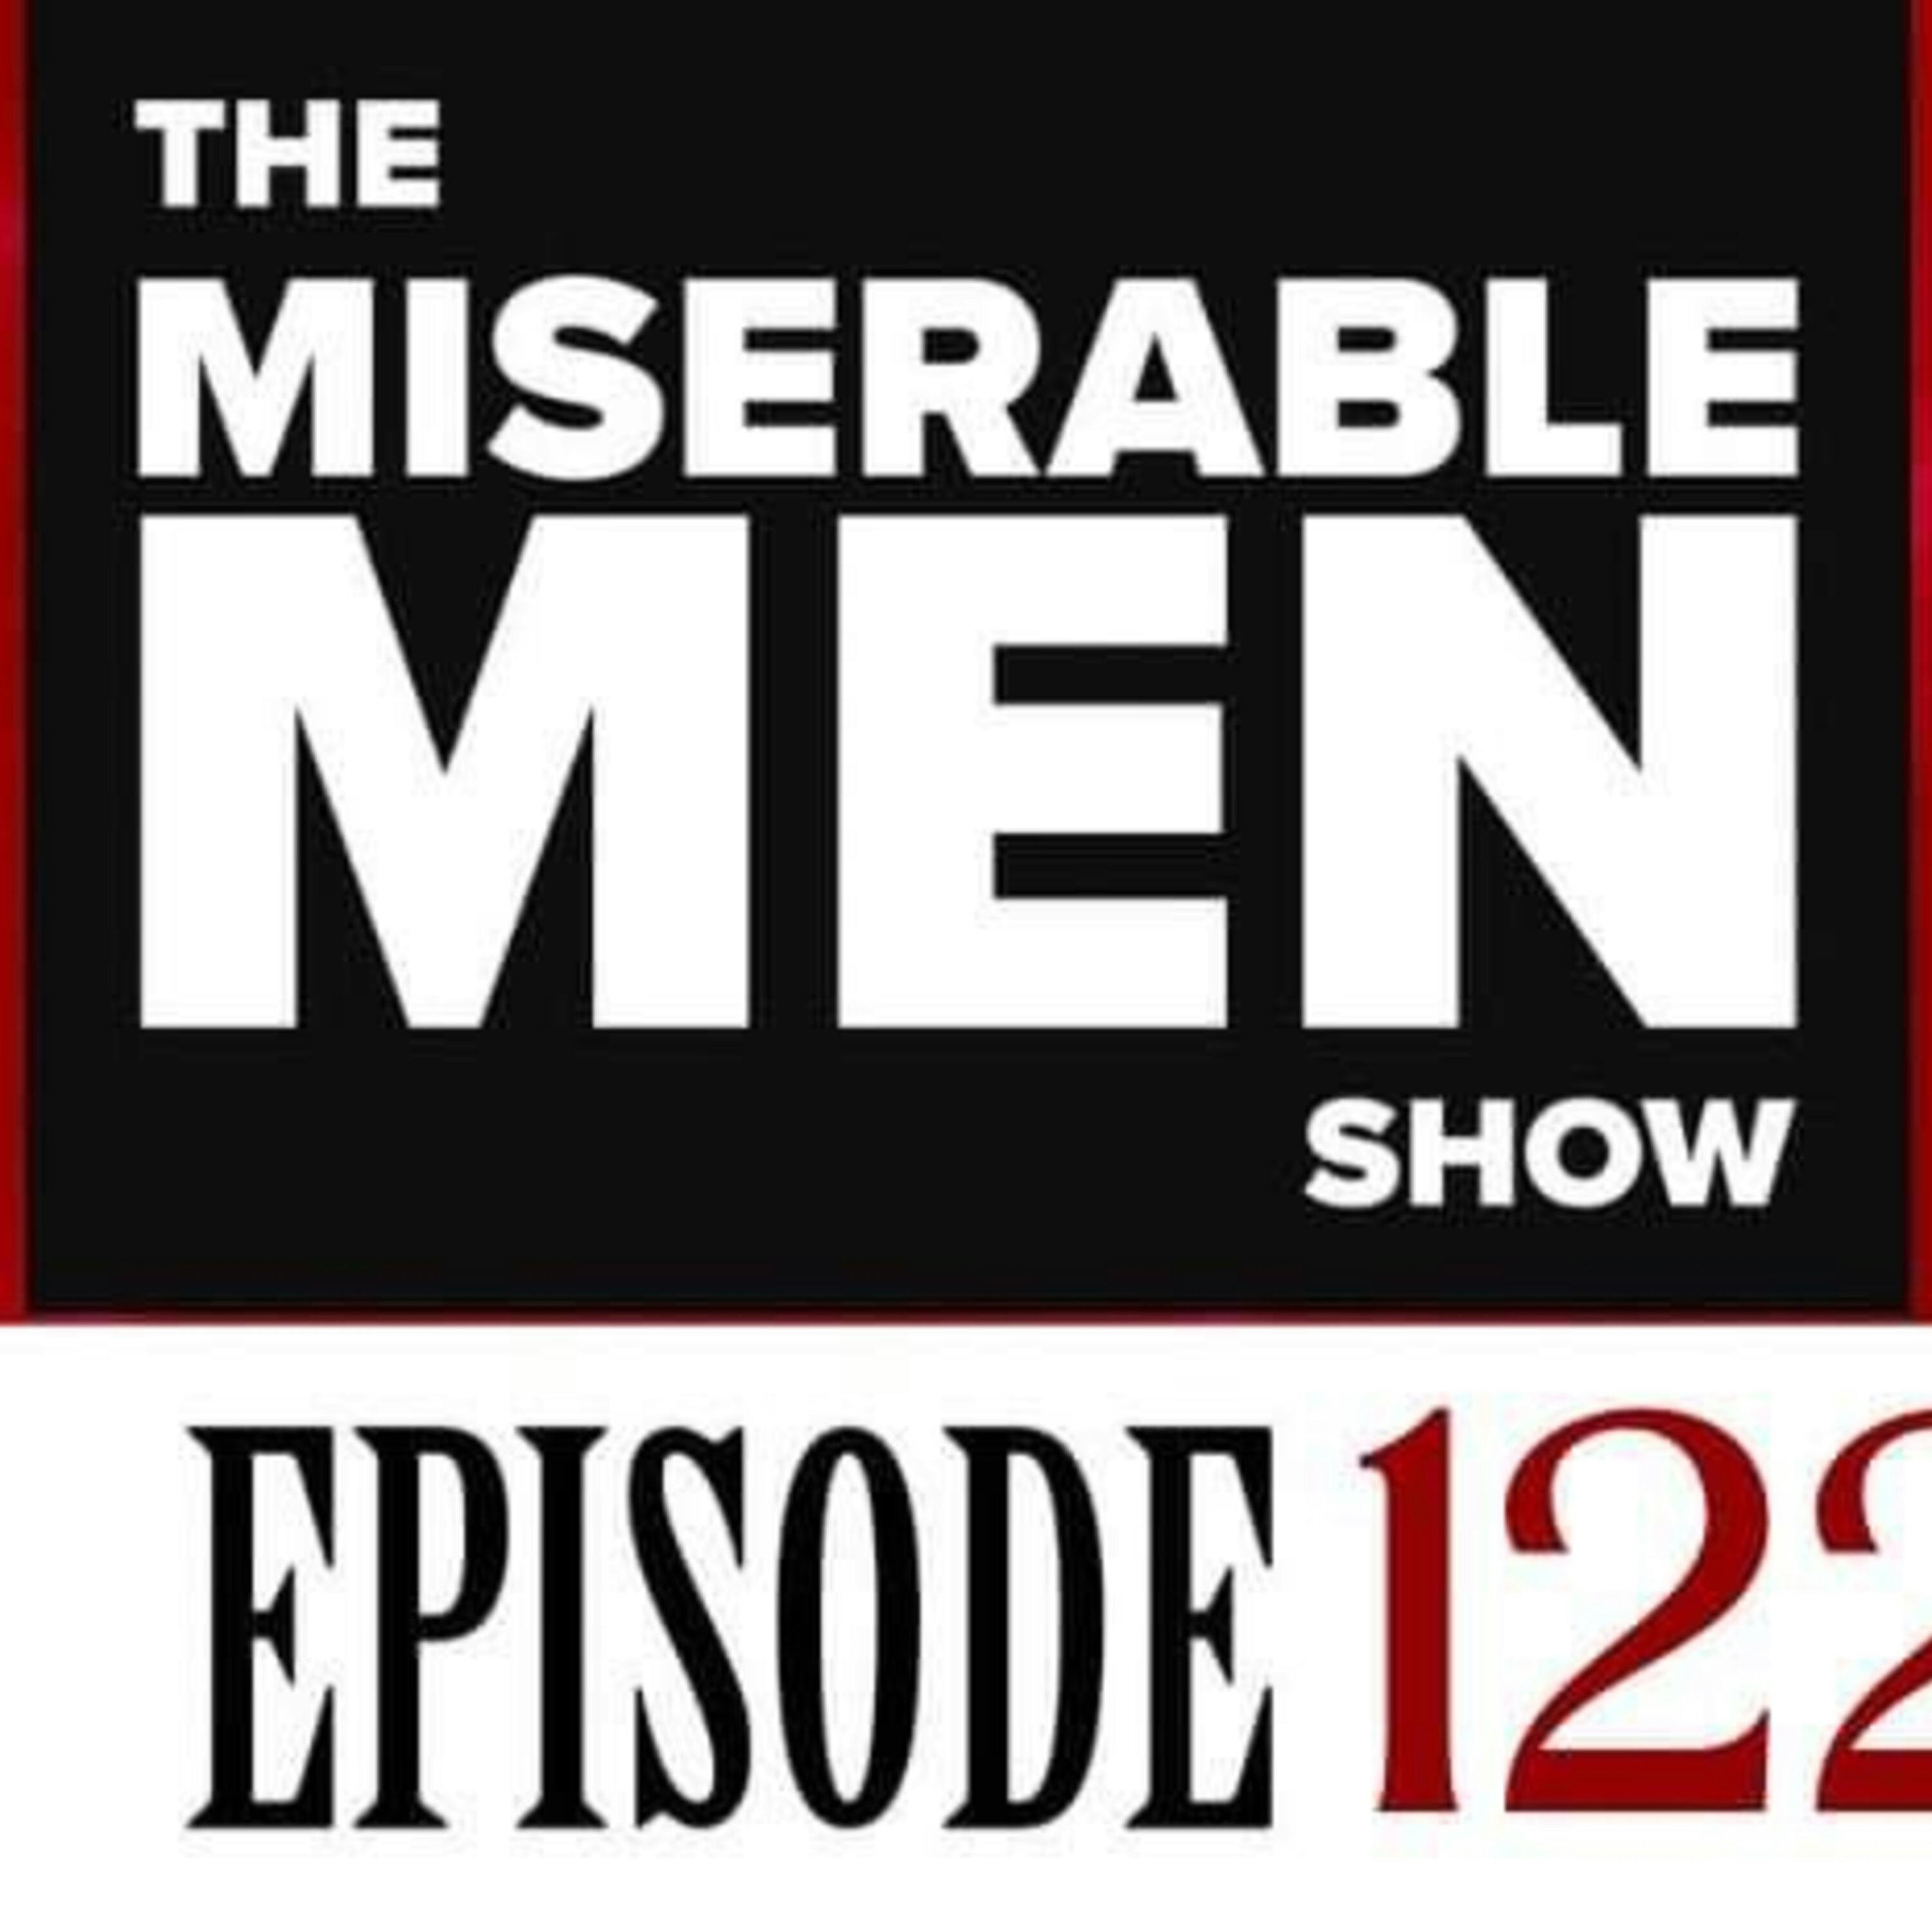 The Miserable Men continue the 